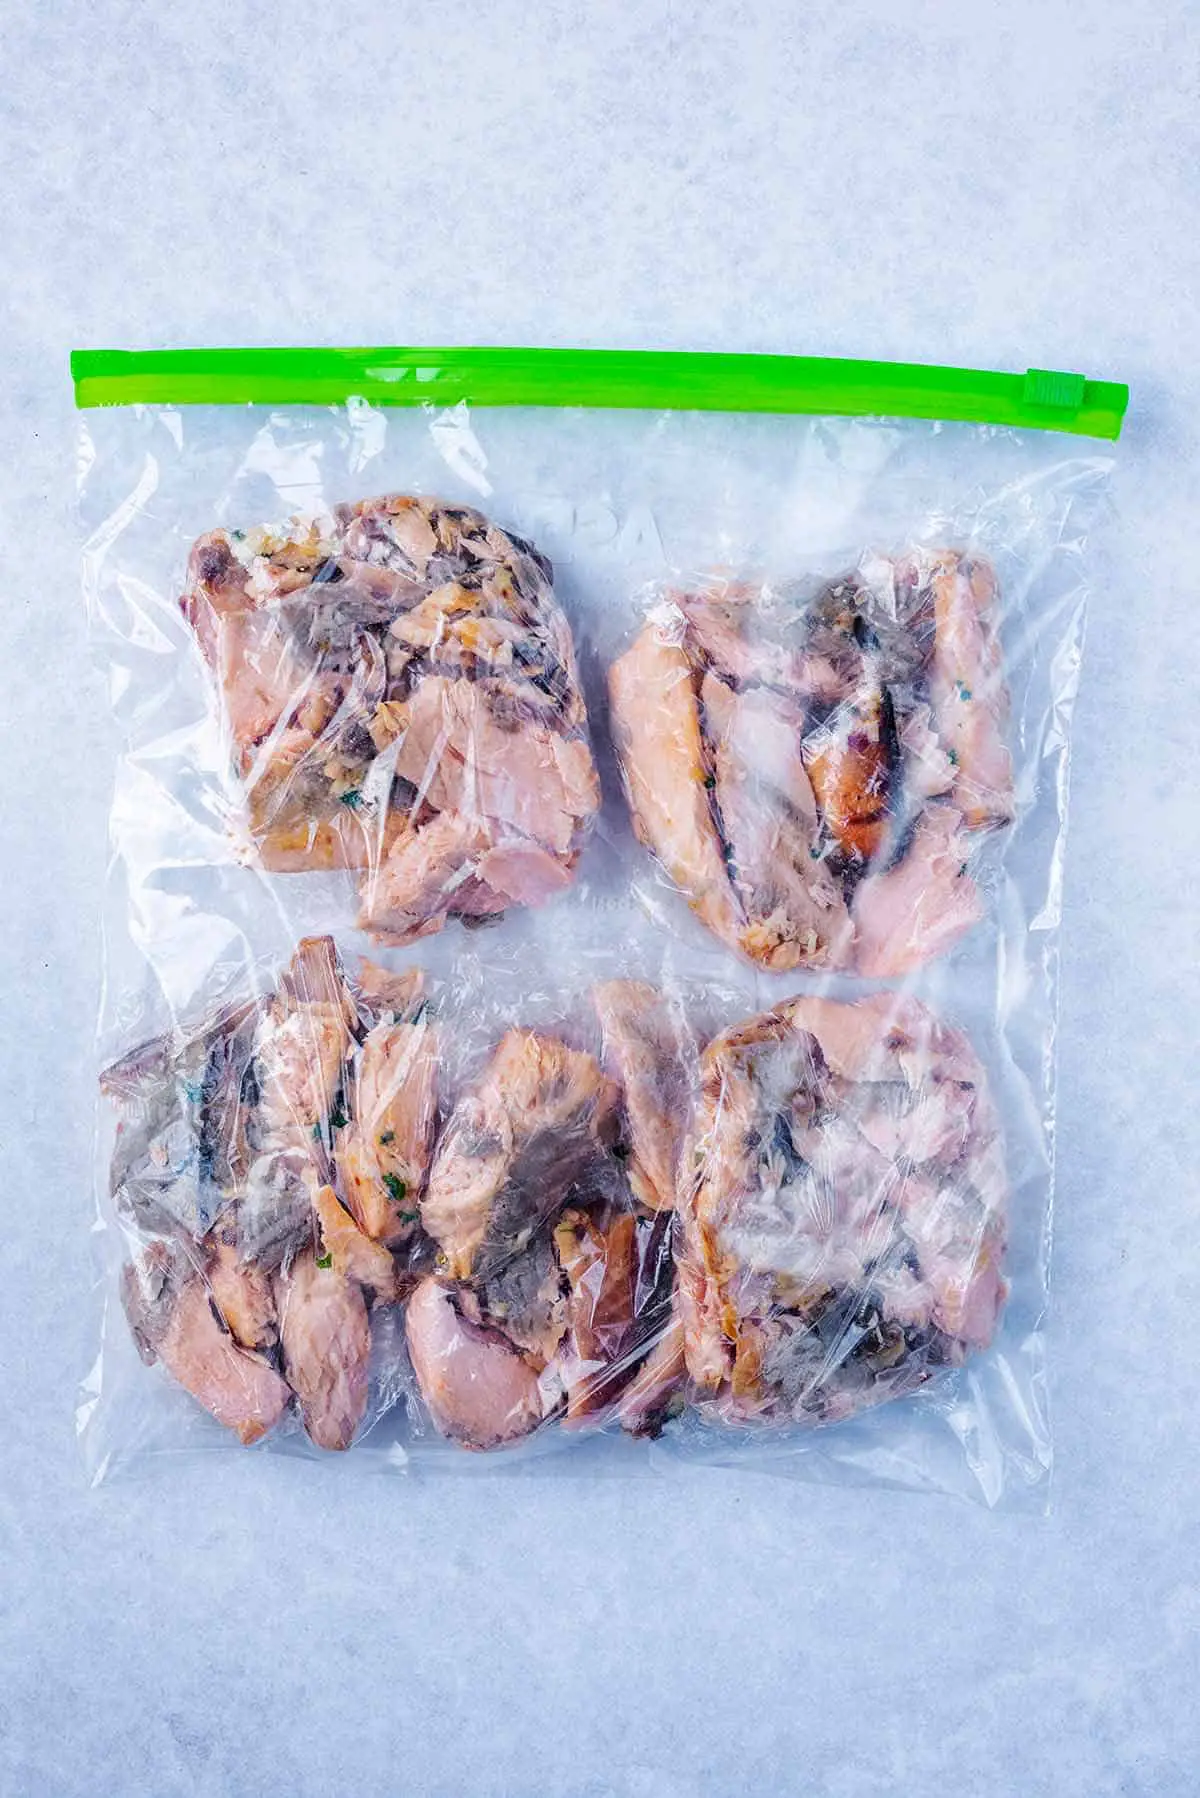 A ziploc freezer bag containing wrapped portions of salmon.